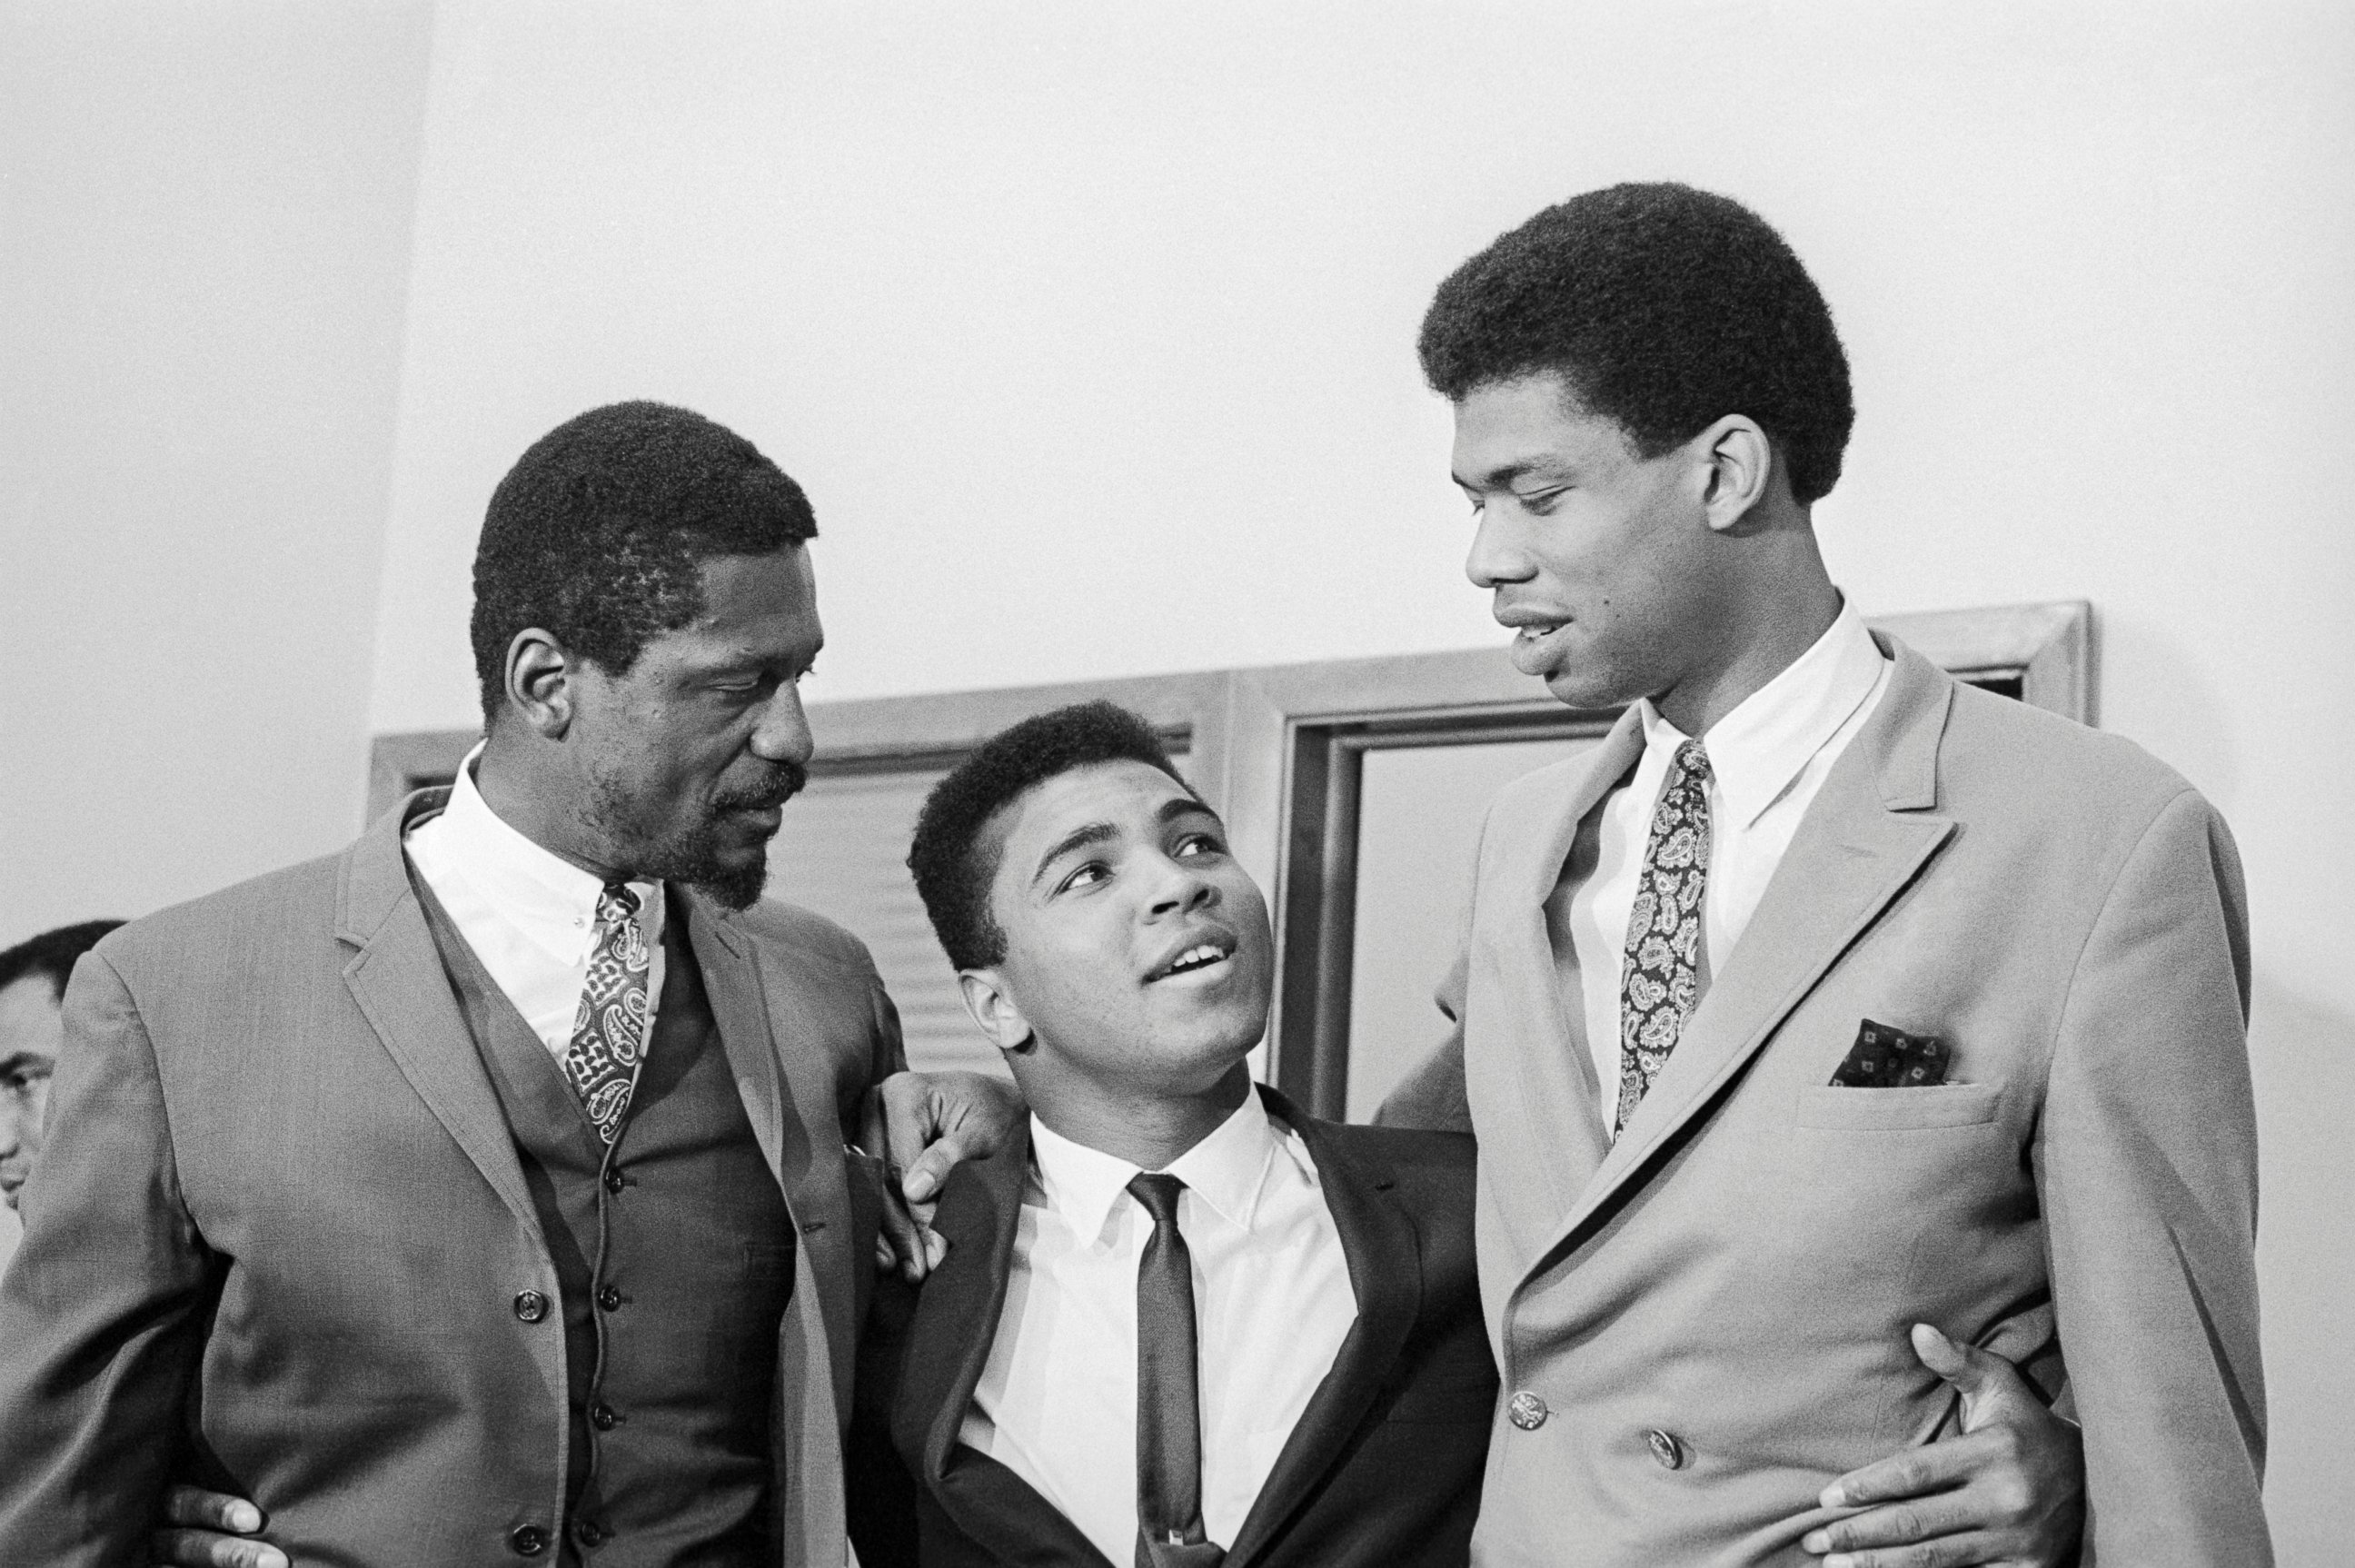 PHOTO: Bill Russell, left, Cassius Clay and Lew Alcindor, later Kareem Abdul-Jabbar, speak at a press conference rejecting US Army induction, June 1967.